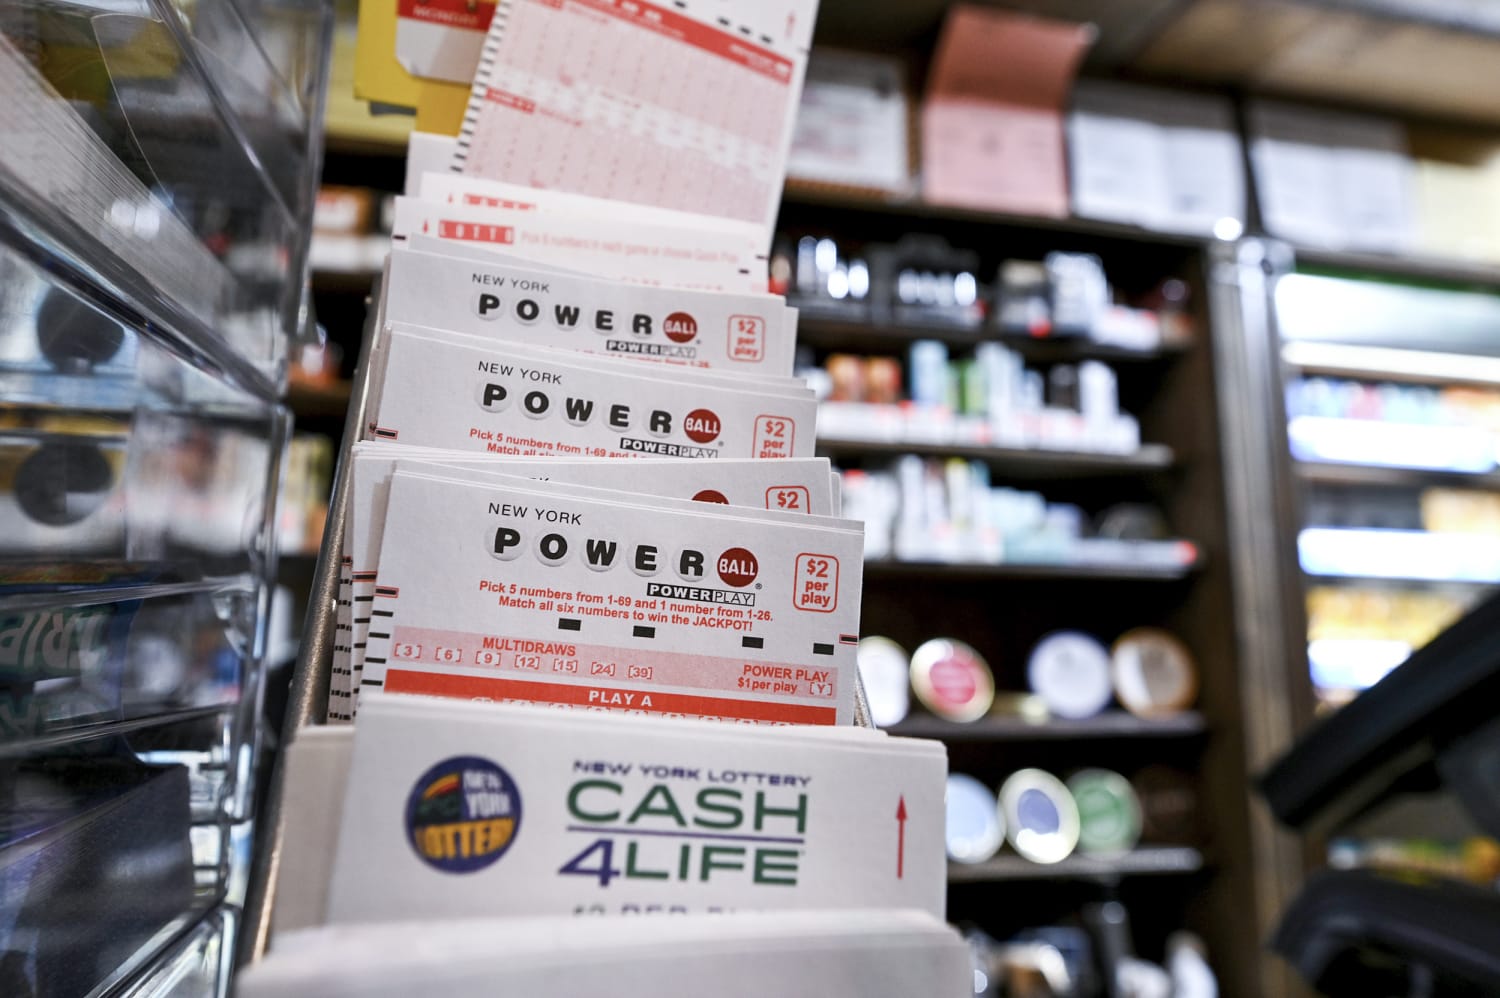 Powerball jackpot grows to $747 million after no winner on Saturday